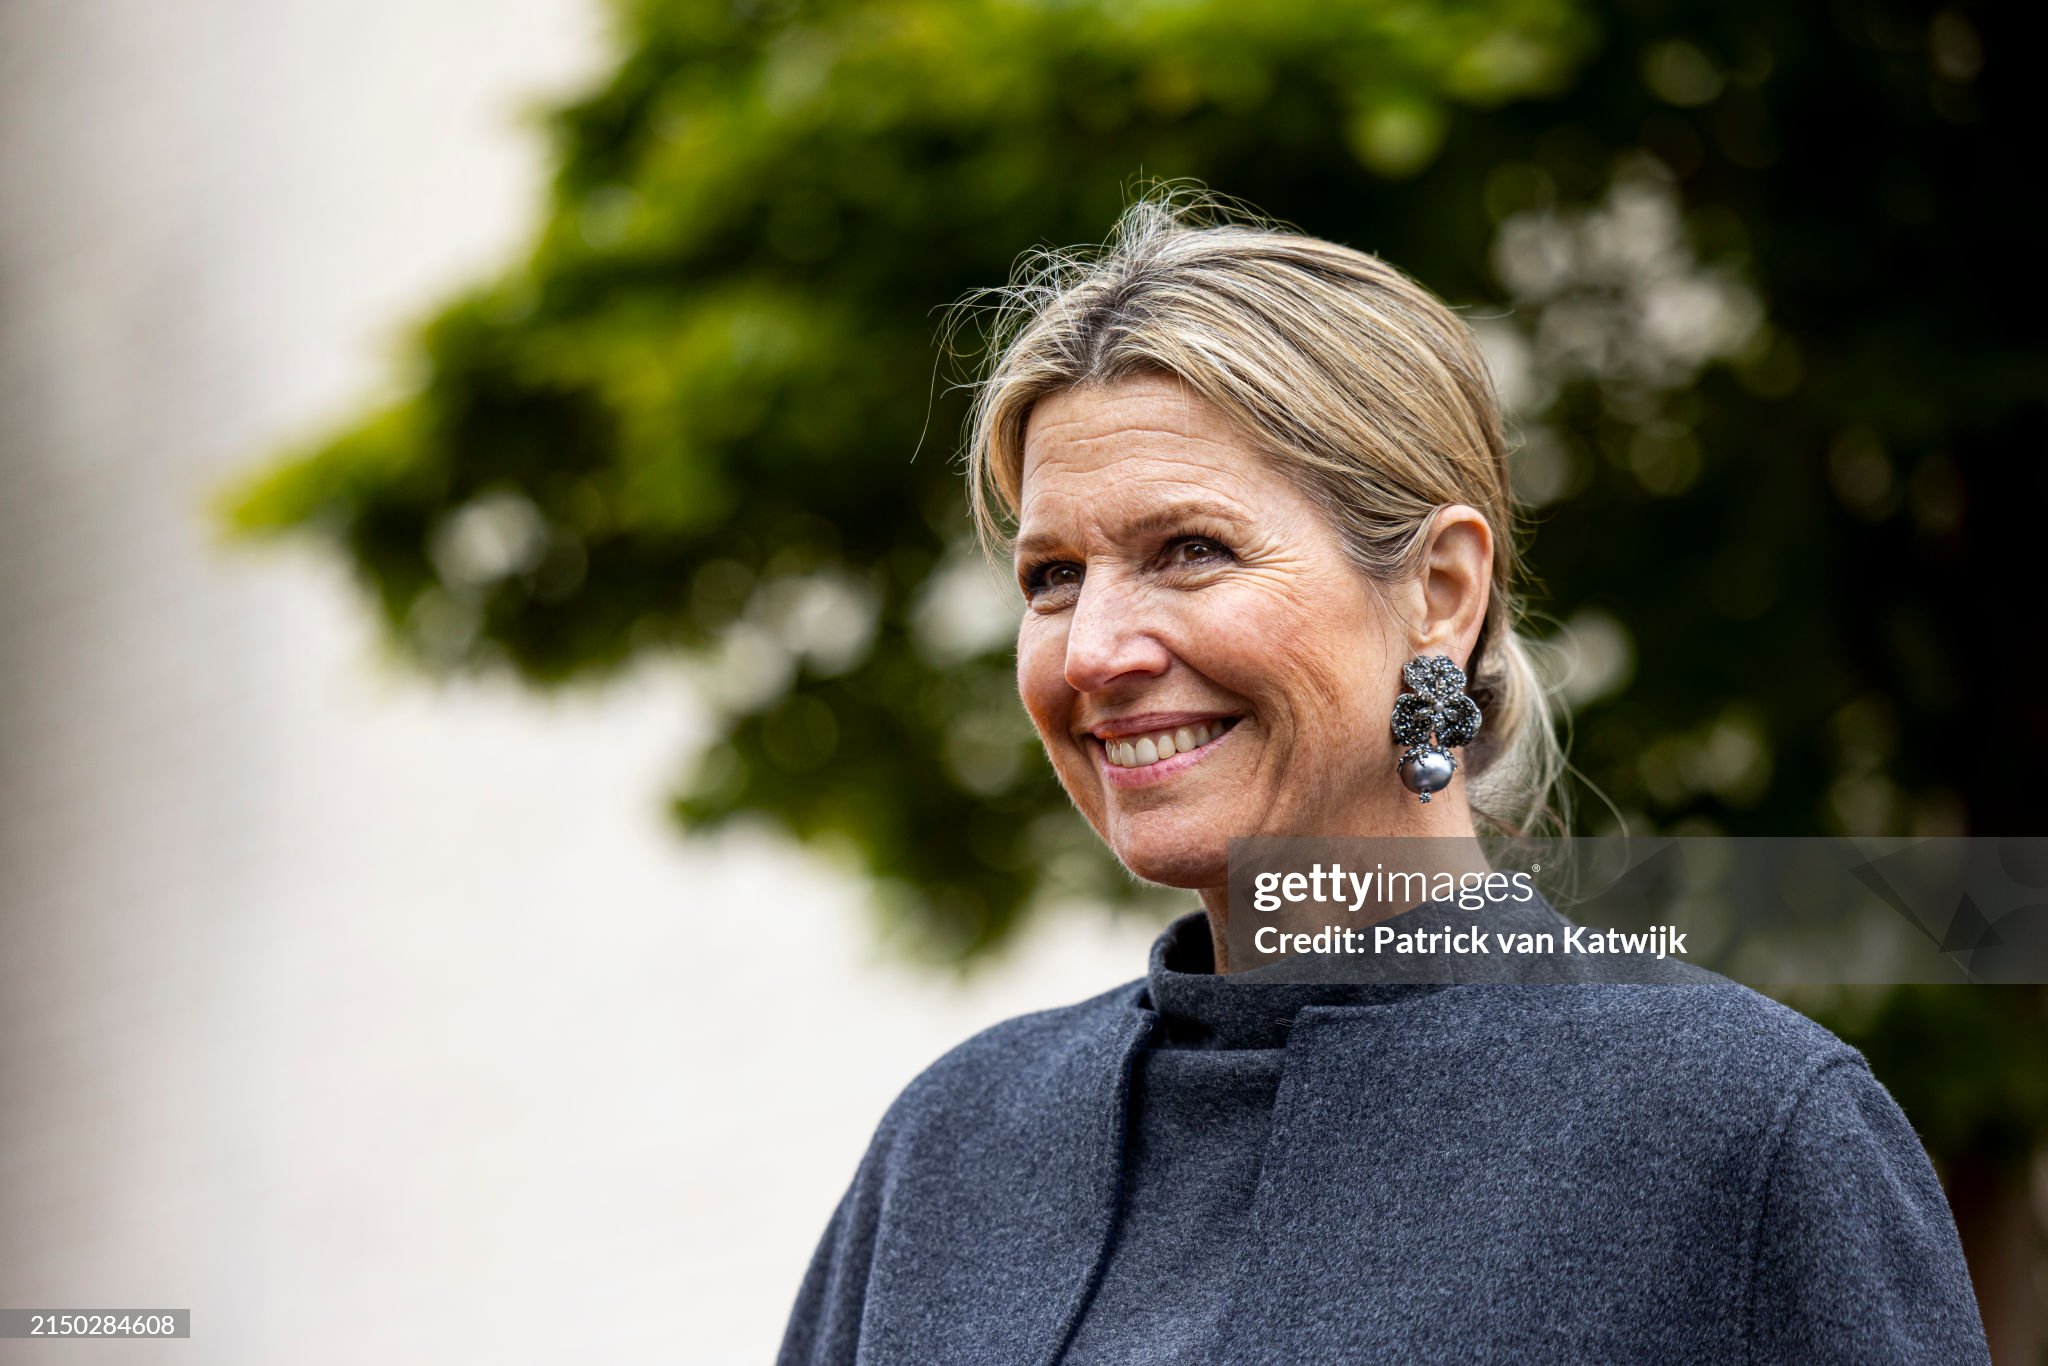 king-willem-alexander-queen-maxima-of-the-netherlands-visits-attend-the-kinsgame-in-hoofddorp.jpg?s=2048x2048&w=gi&k=20&c=pUns_ndy3eH0HpFEsTYU1889EyqZdQOZRObqcgPsvCA=